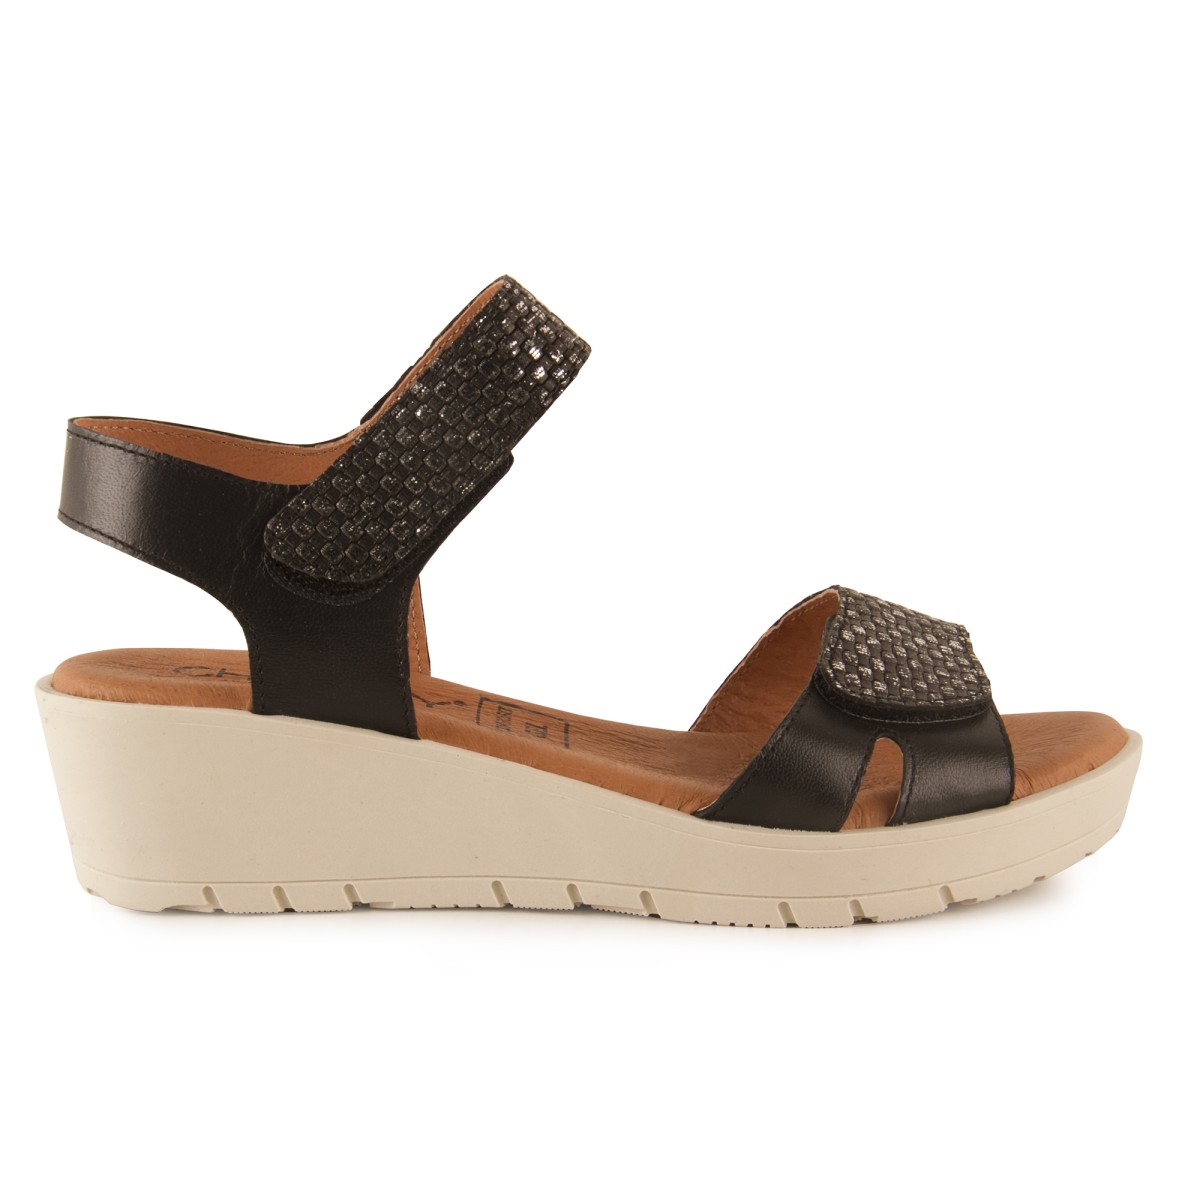 Black leather sandals by Chamby